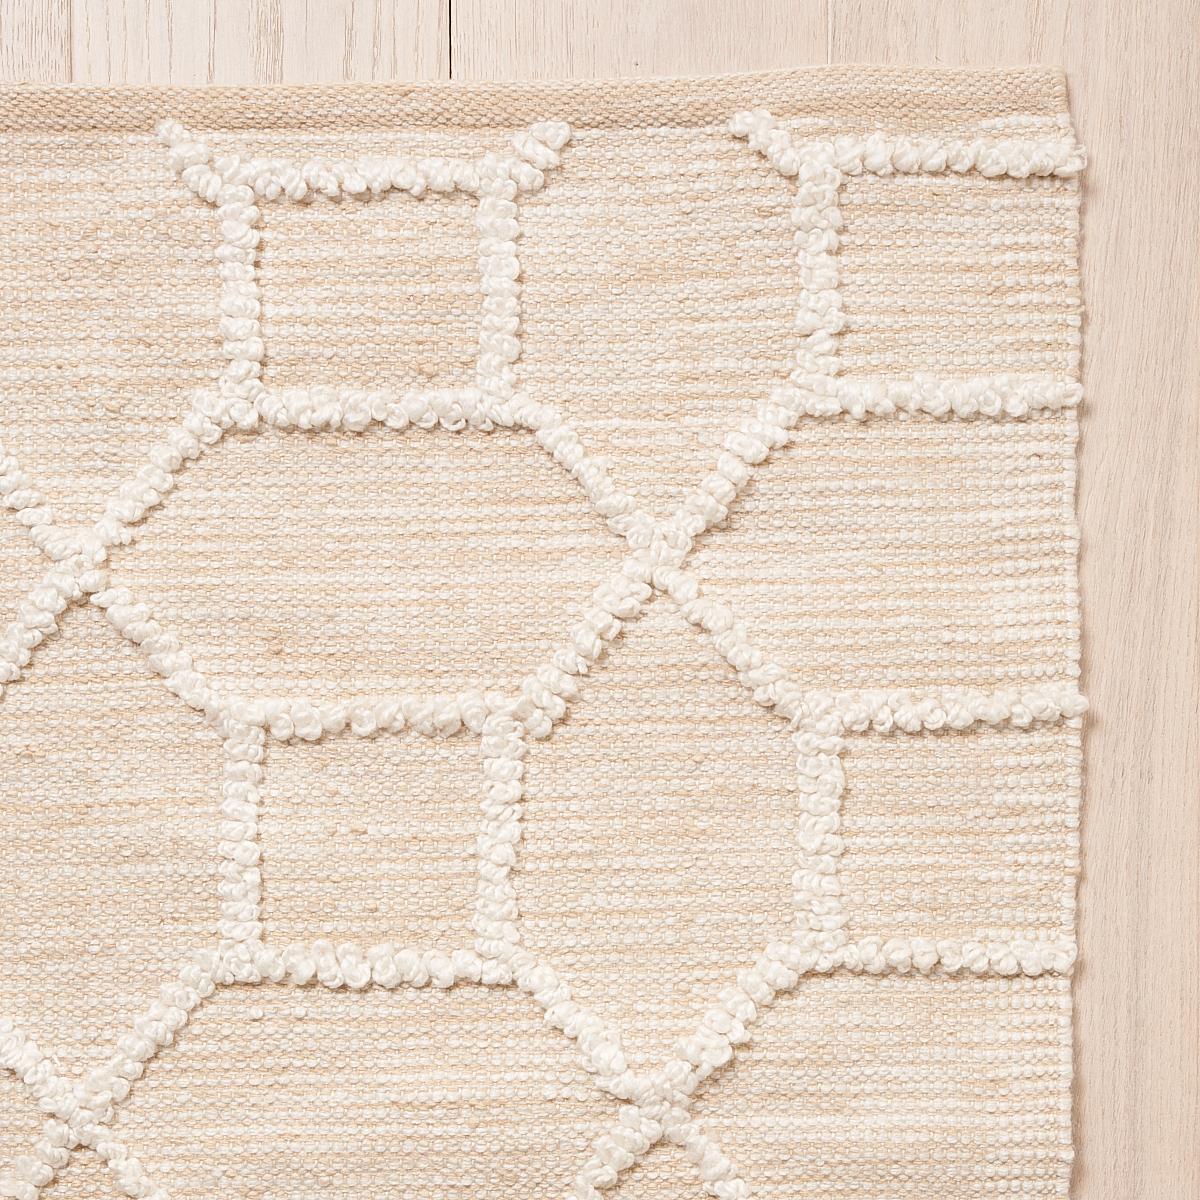 This rug will ship in December. Made of soft yet super-durable PET, Vento is as stylish as it is practical. Inspired by our Vento Embroidery fabric, this large-scale lattice design has fabulous texture and tonal variations. Equally at home indoors